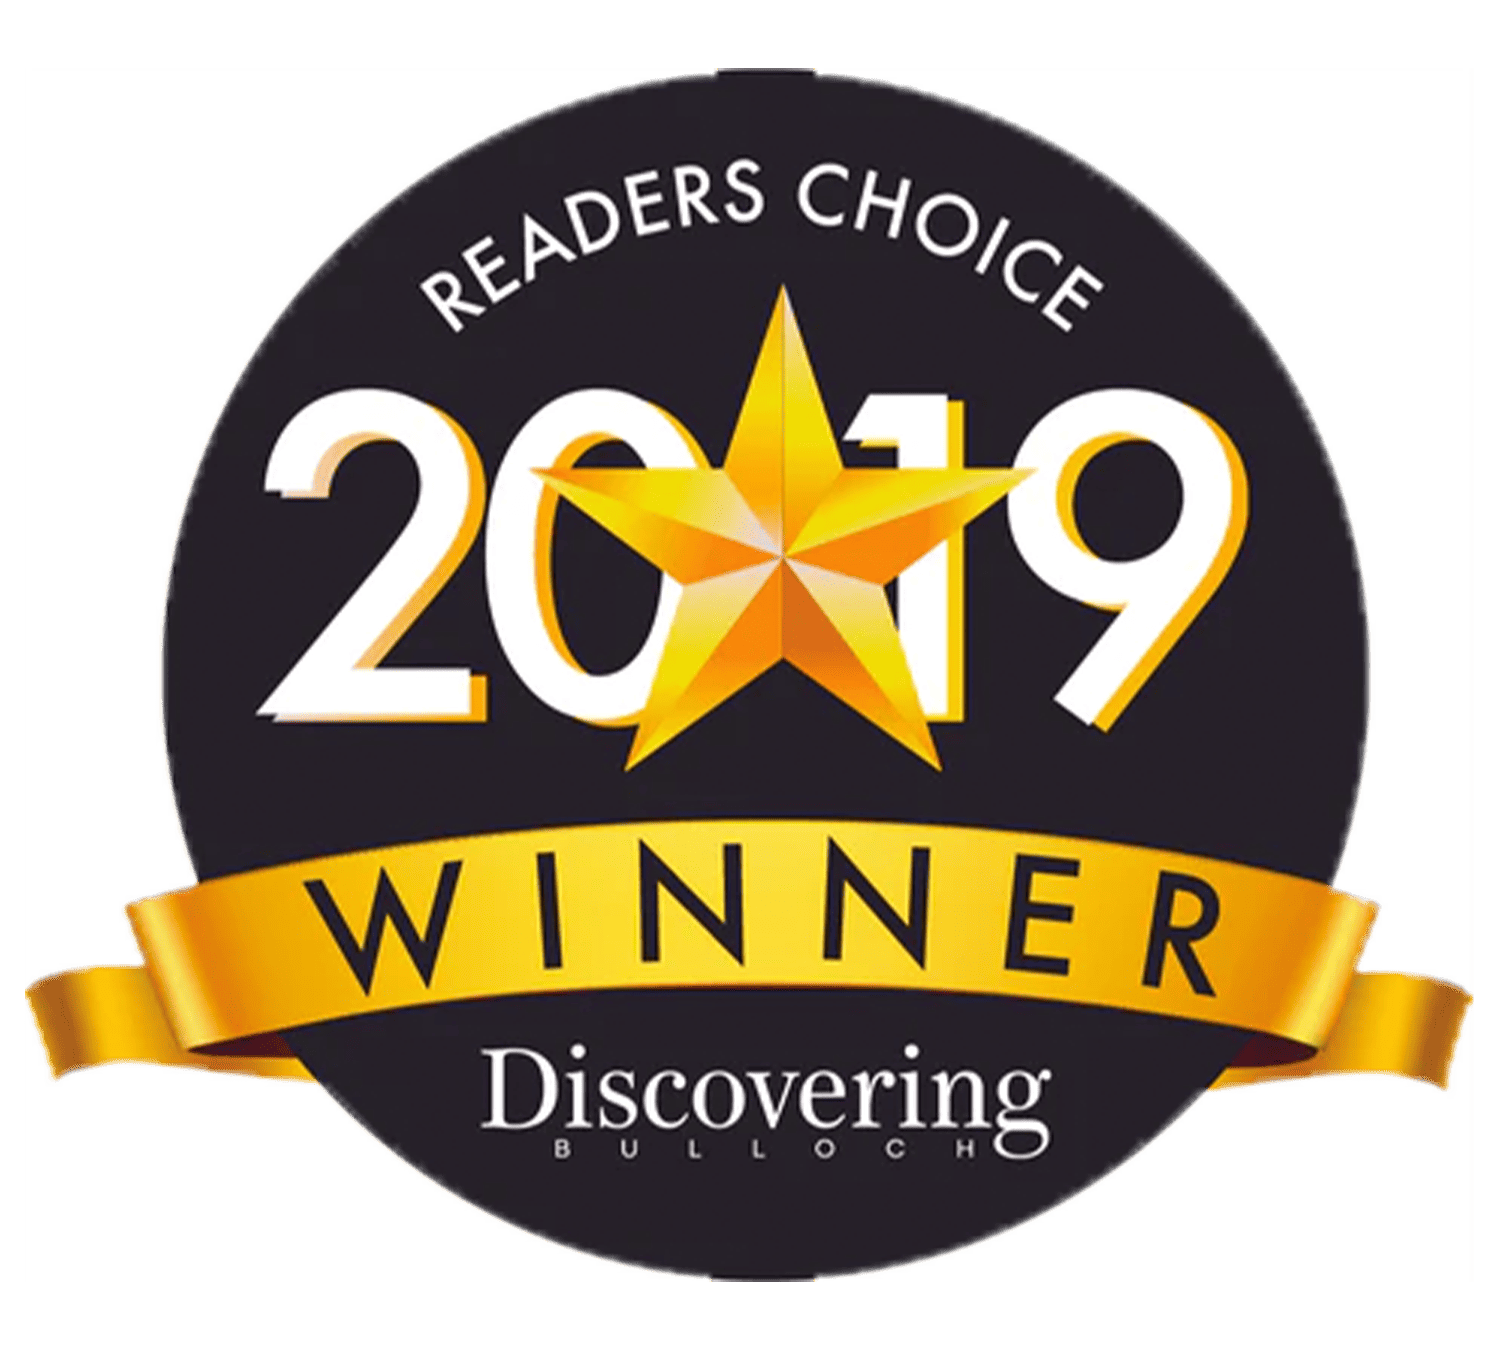 The Readers Choice logo is displayed for being the 2019 winners.